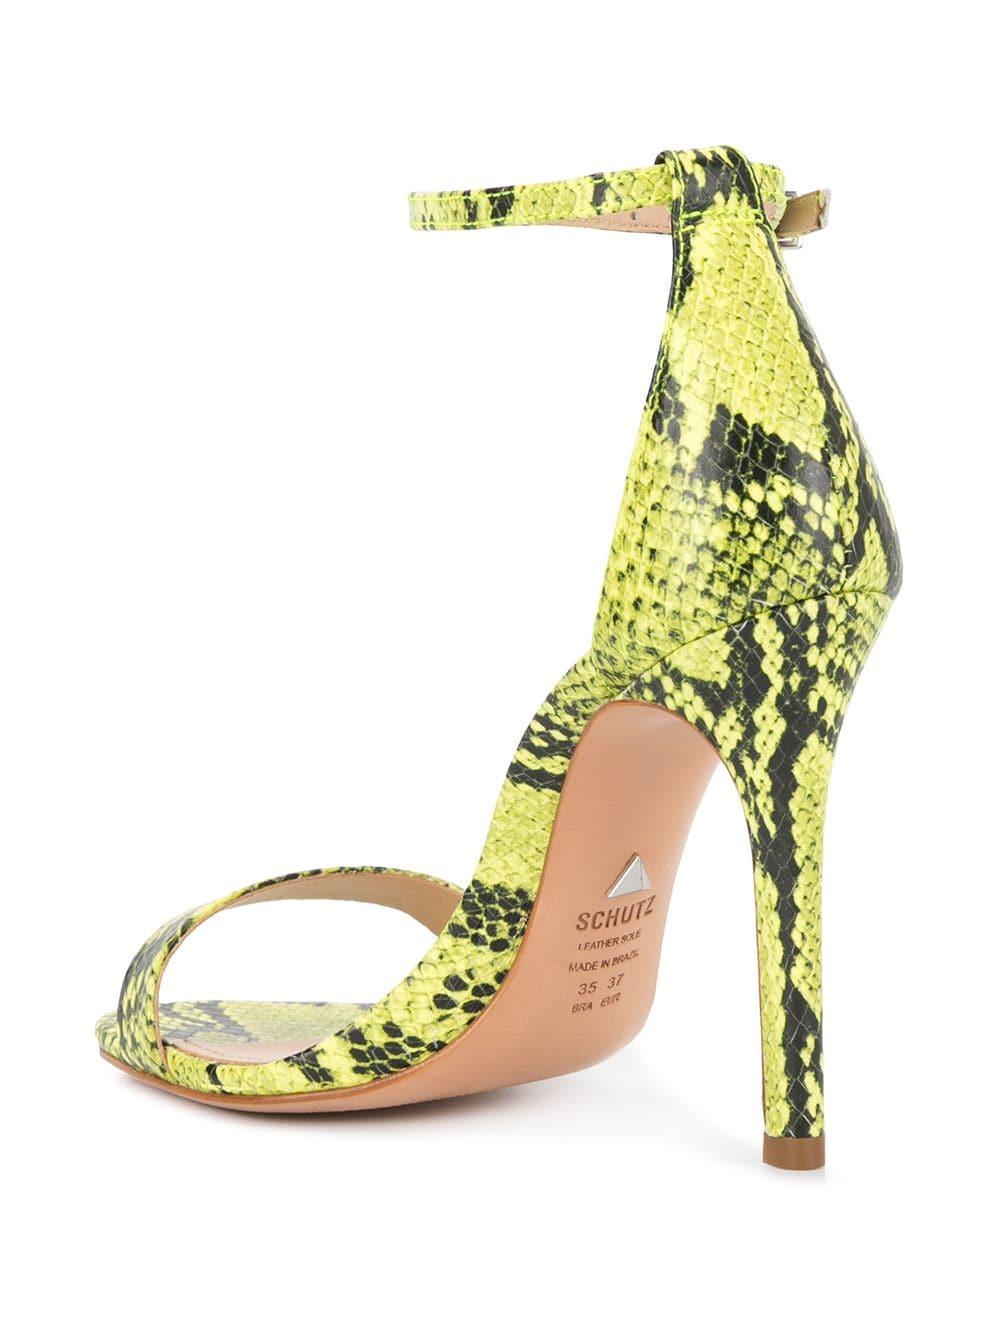 River Island strappy tie up heeled sandal in blue snake print | ASOS